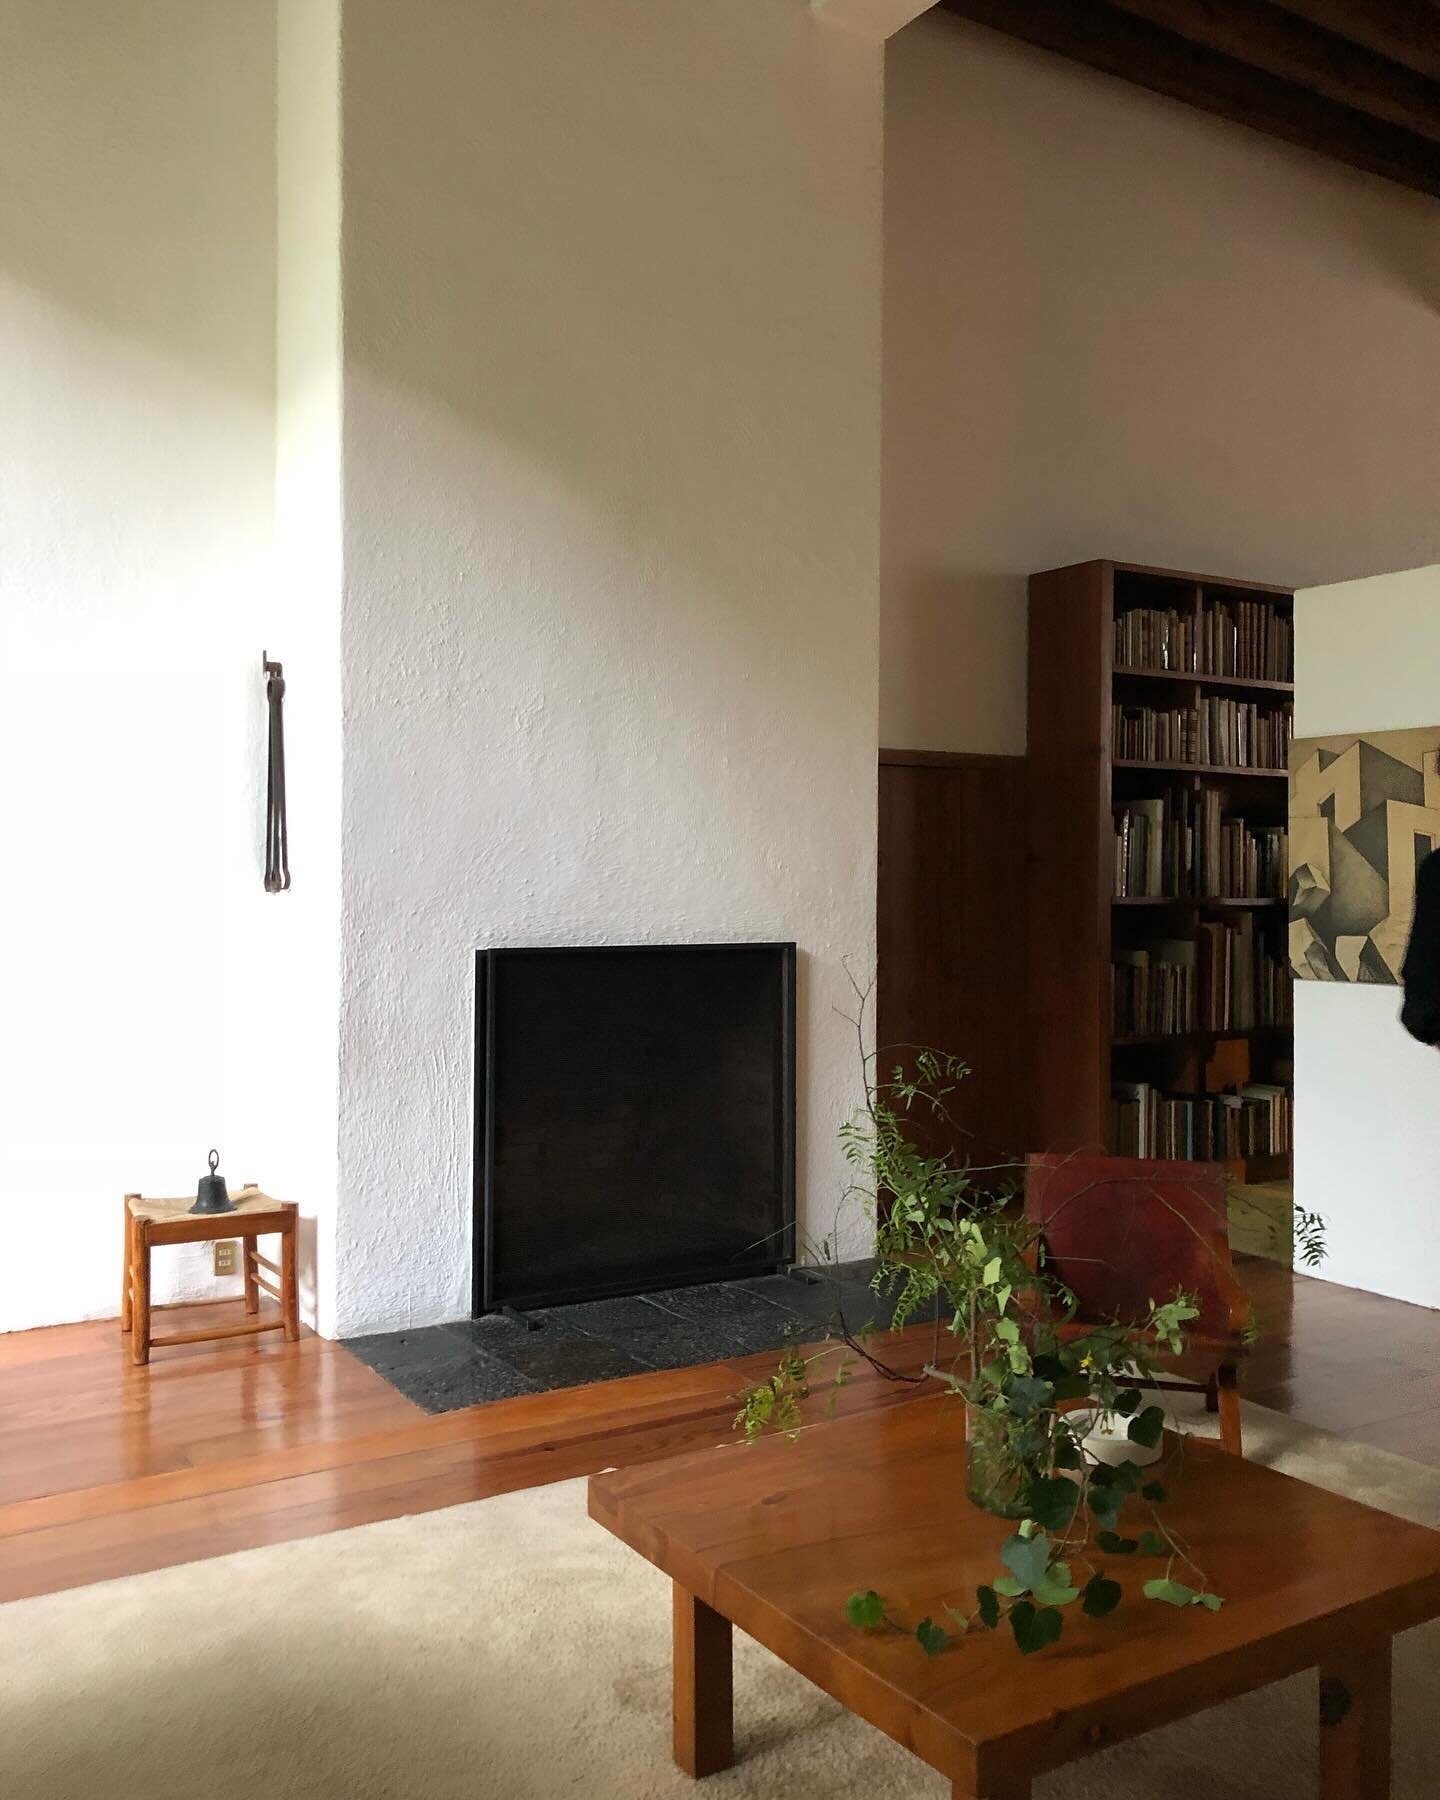 Casa Barrag&aacute;n - Luis Barrag&aacute;n&rsquo;s home in M&eacute;xico City, from a trip in 2018. I&rsquo;m returning to Mexico later this month. This time to Oaxaca, my first trip there! Please share any food, art or craft you think I&rsquo;d lov